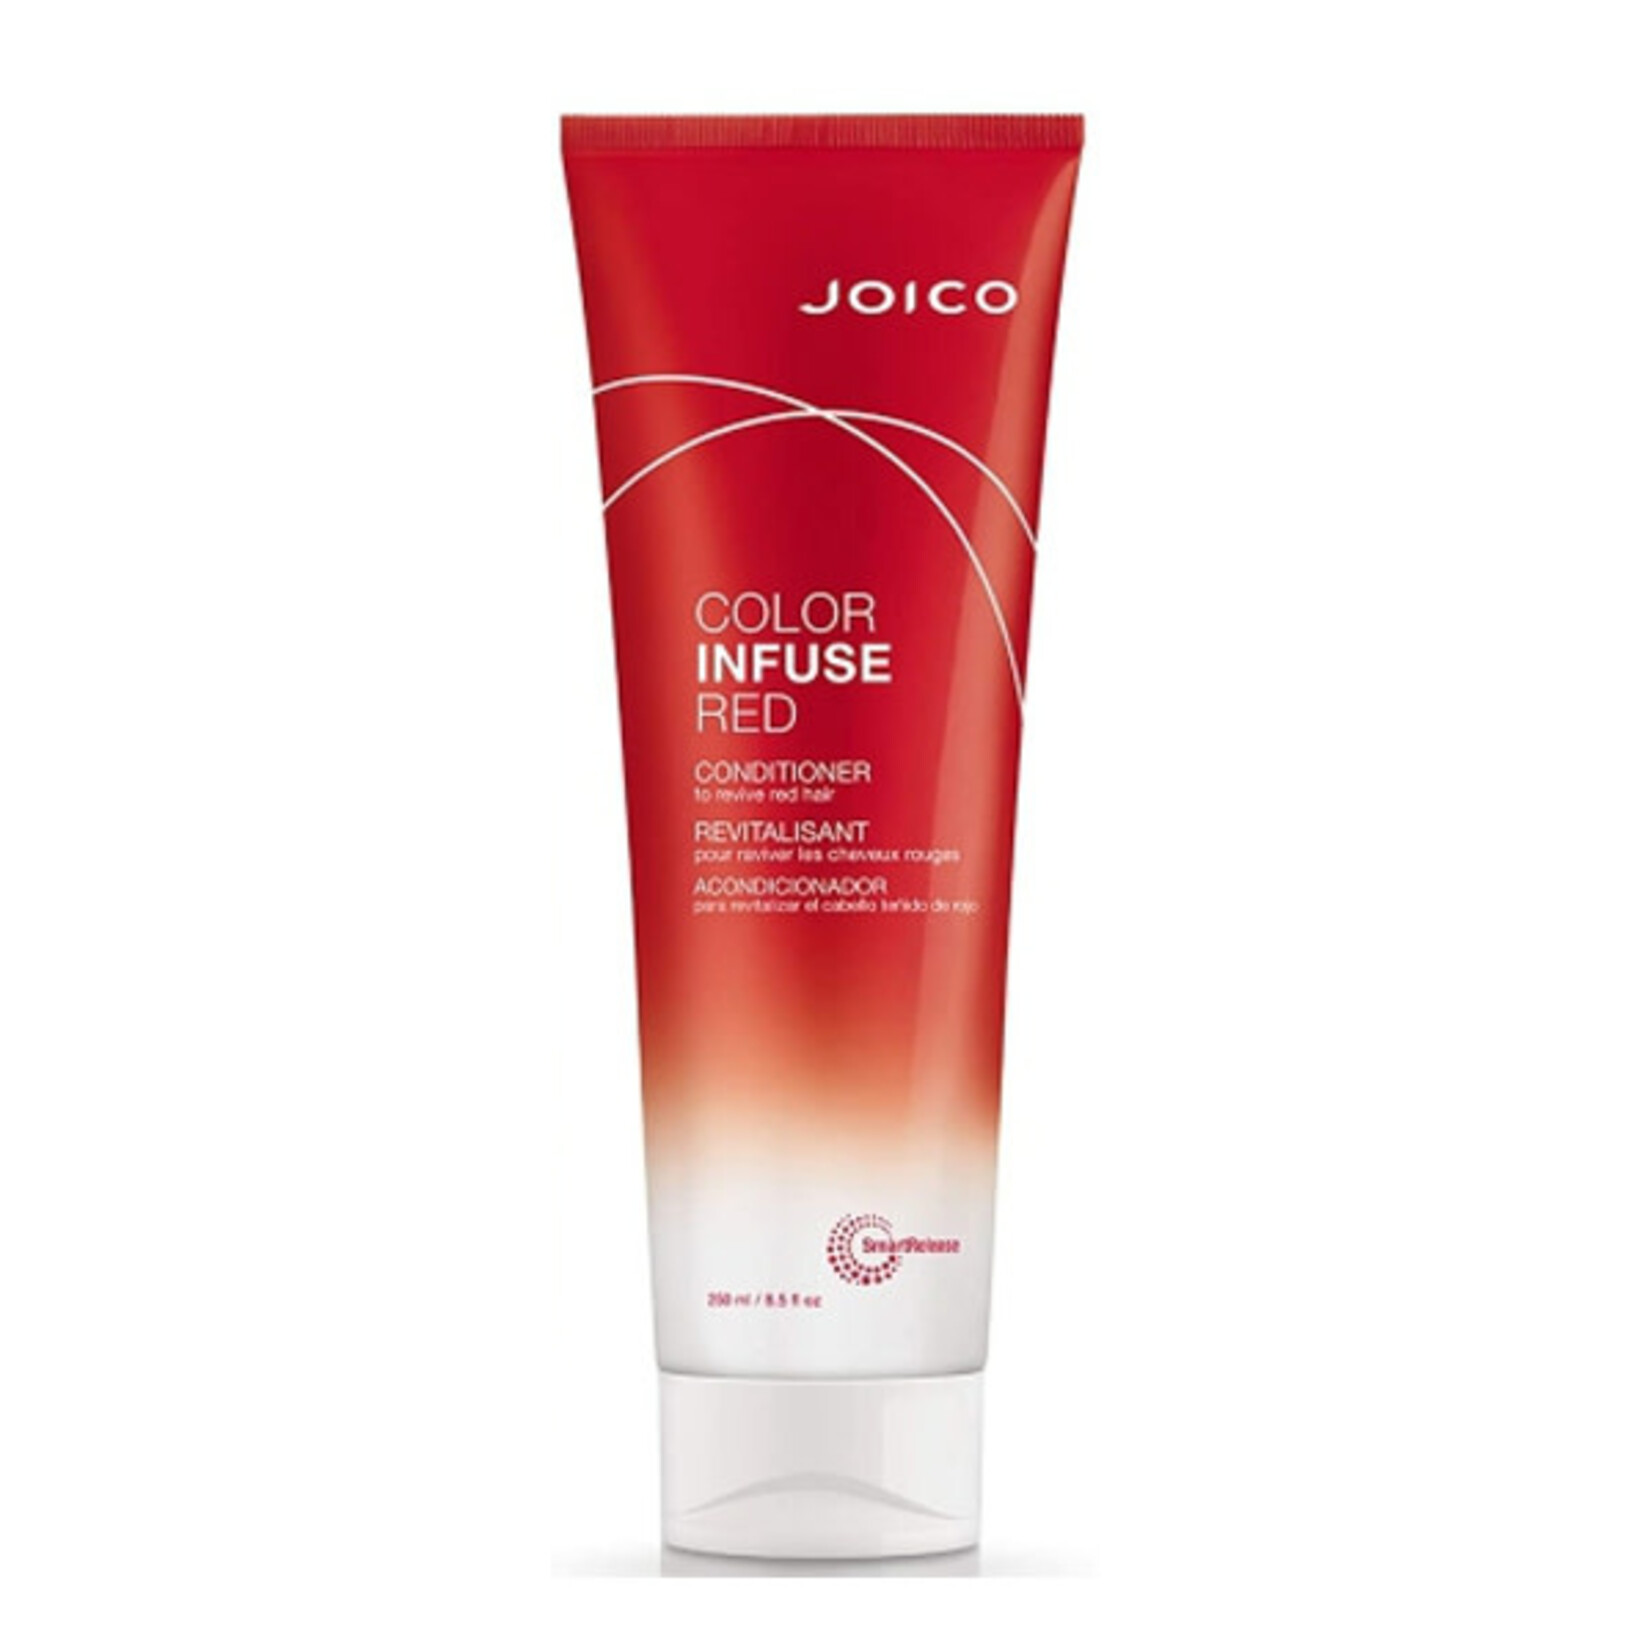 Joico Joico - Color Infuse - Red Conditionner 250ml